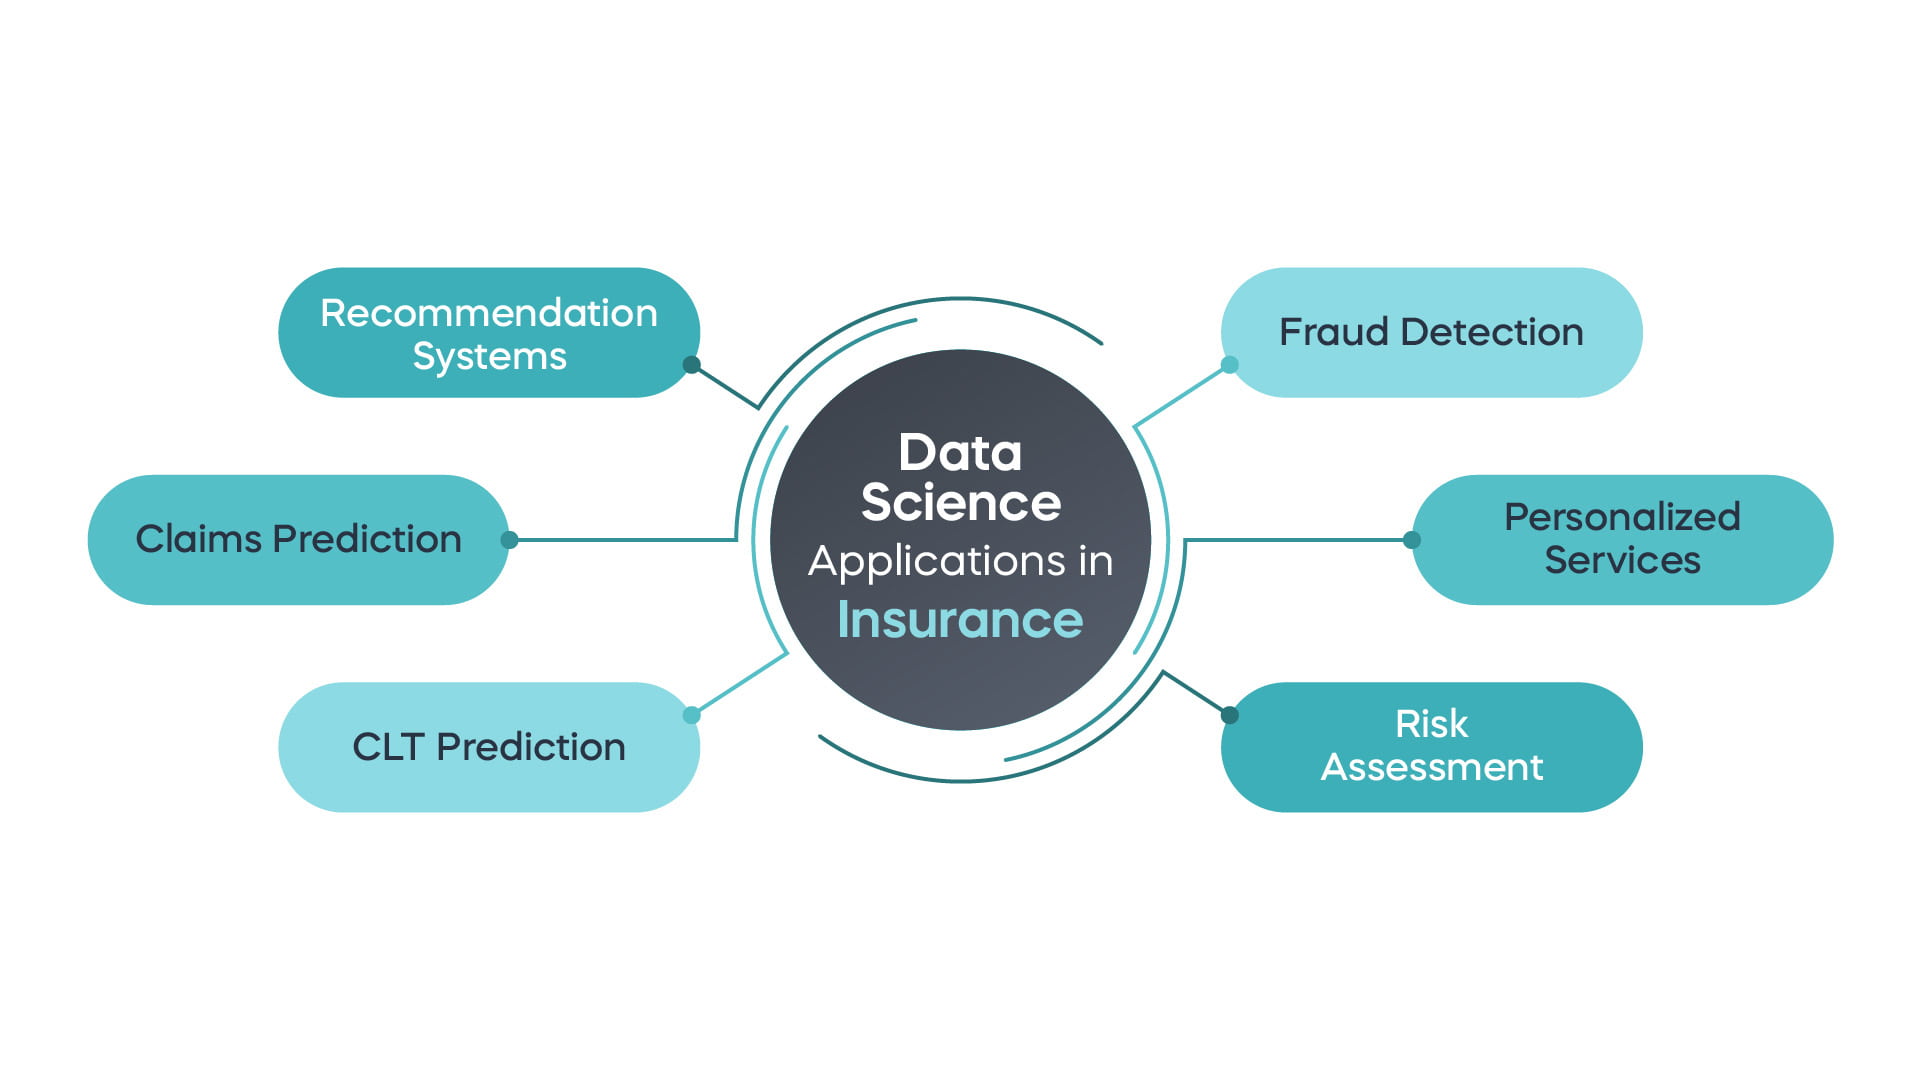 A mindmap showing the different applications of data science in insurance: fraud detection, personalized services, risk assessment, CLT prediction, claims prediction, and recommendation systems.